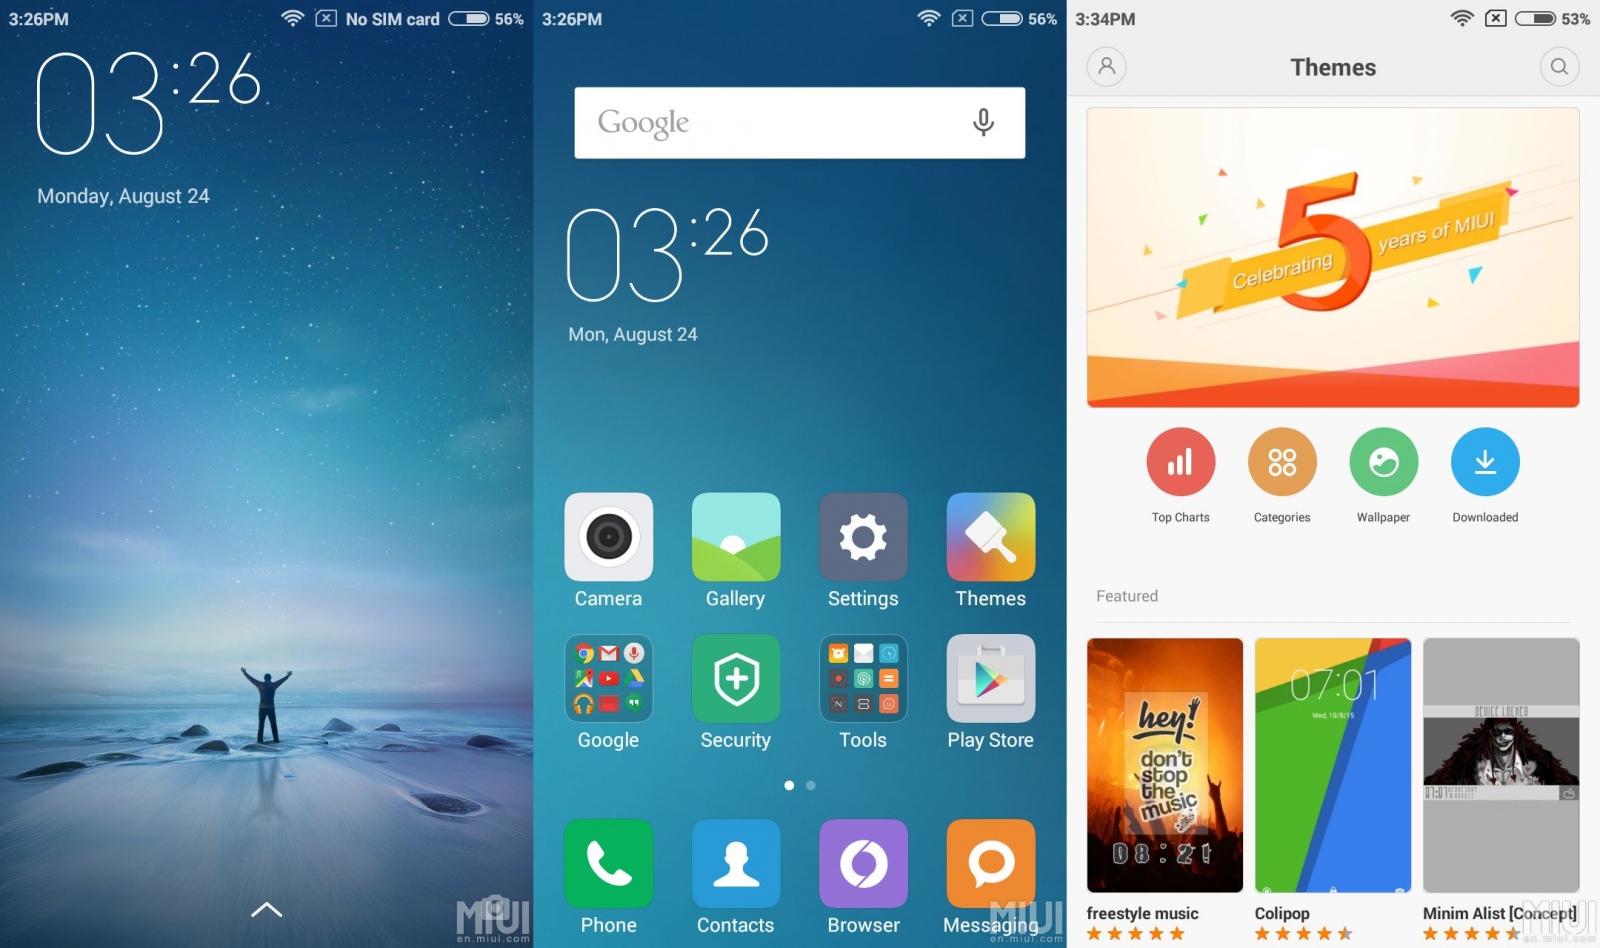 miui7 rom for galaxy note 3